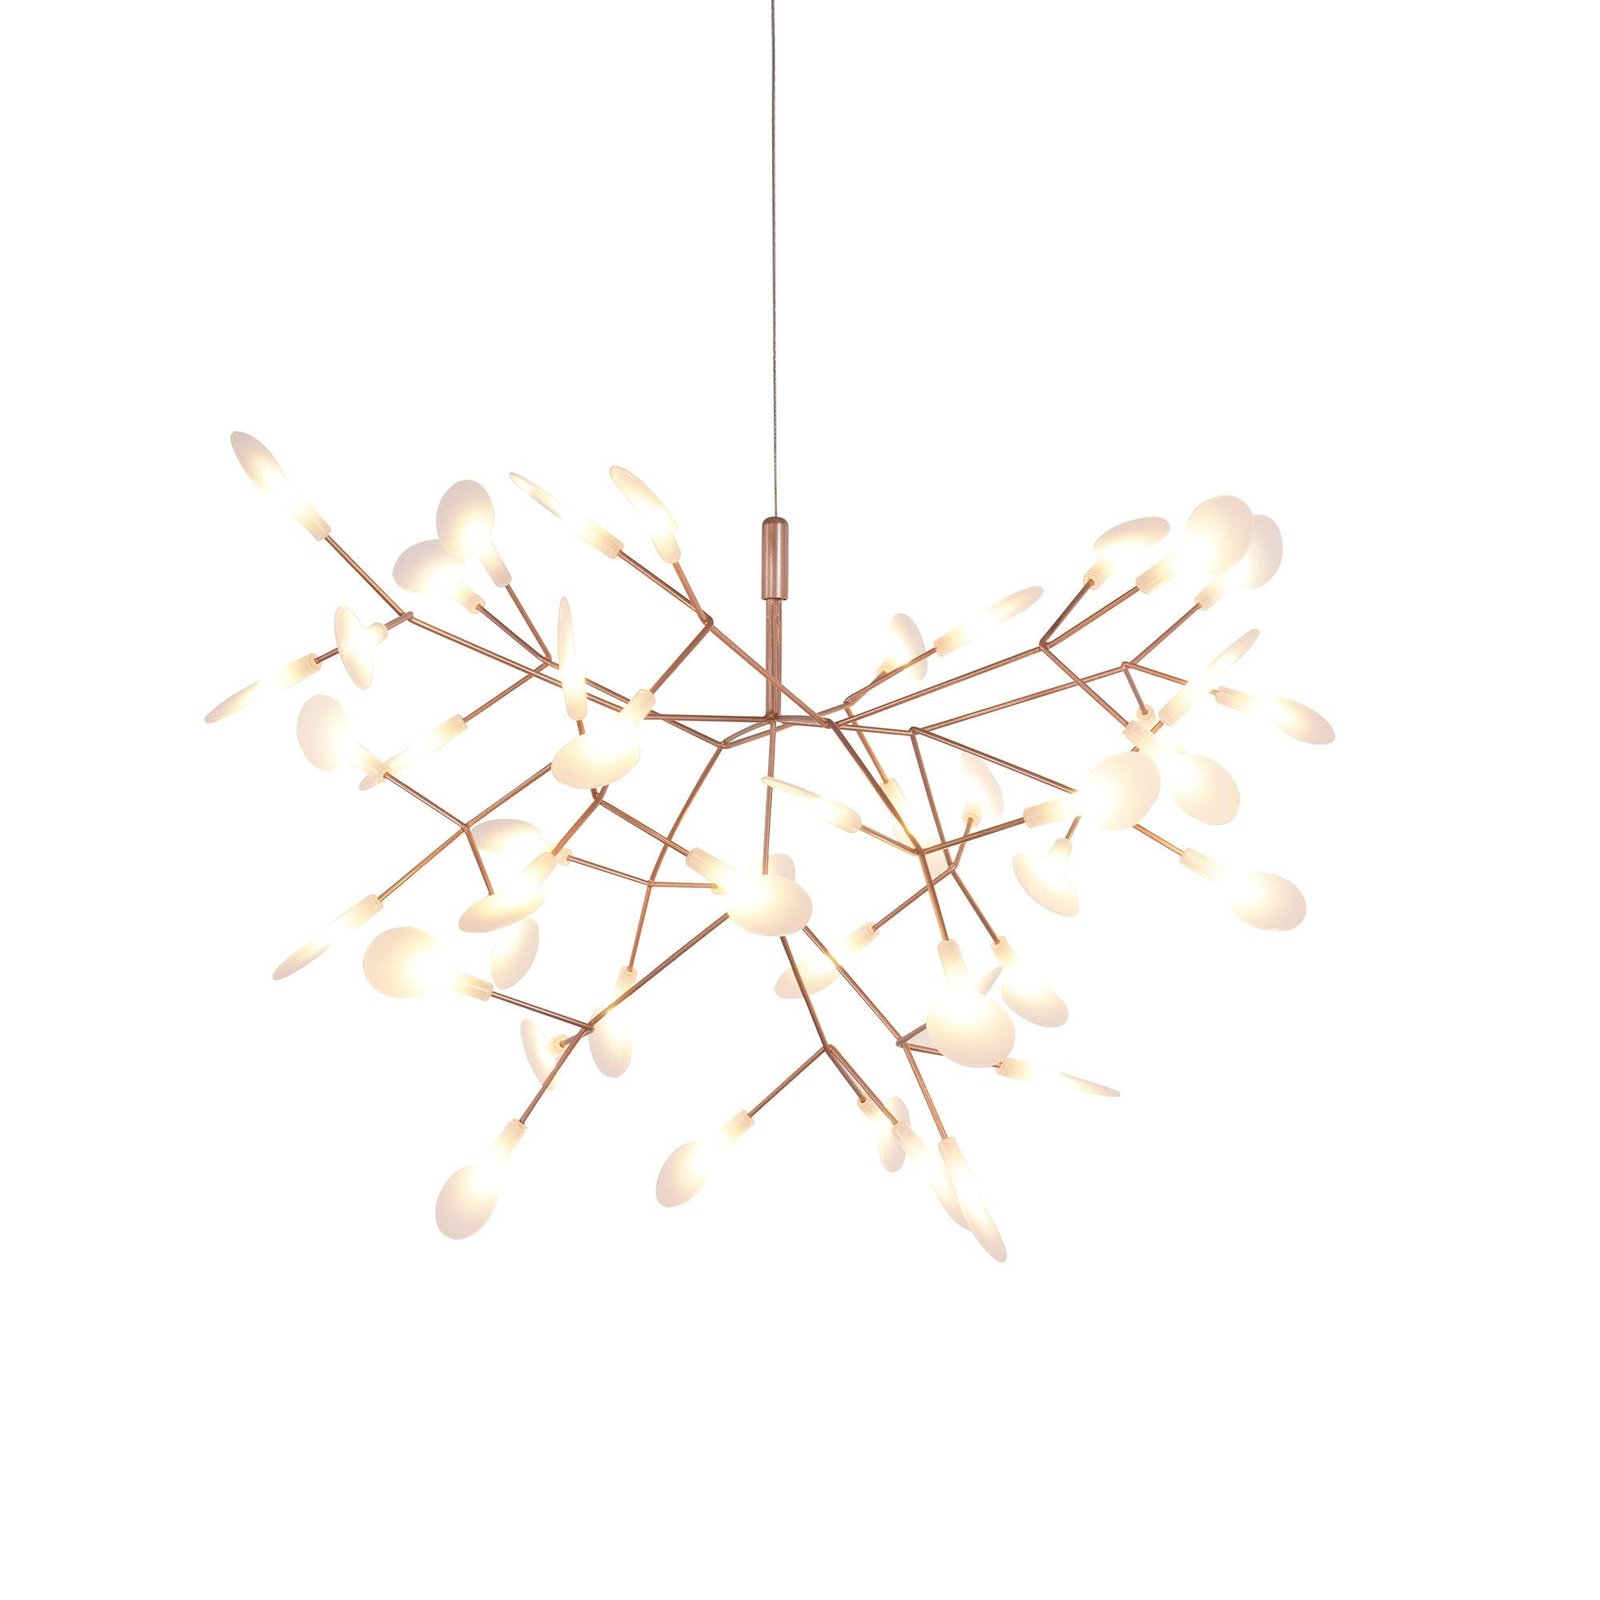 45-head Heracleum Chandeliers in Rose Gold, with a Diameter of 72cm (28.3 inches) and Cold White Lighting